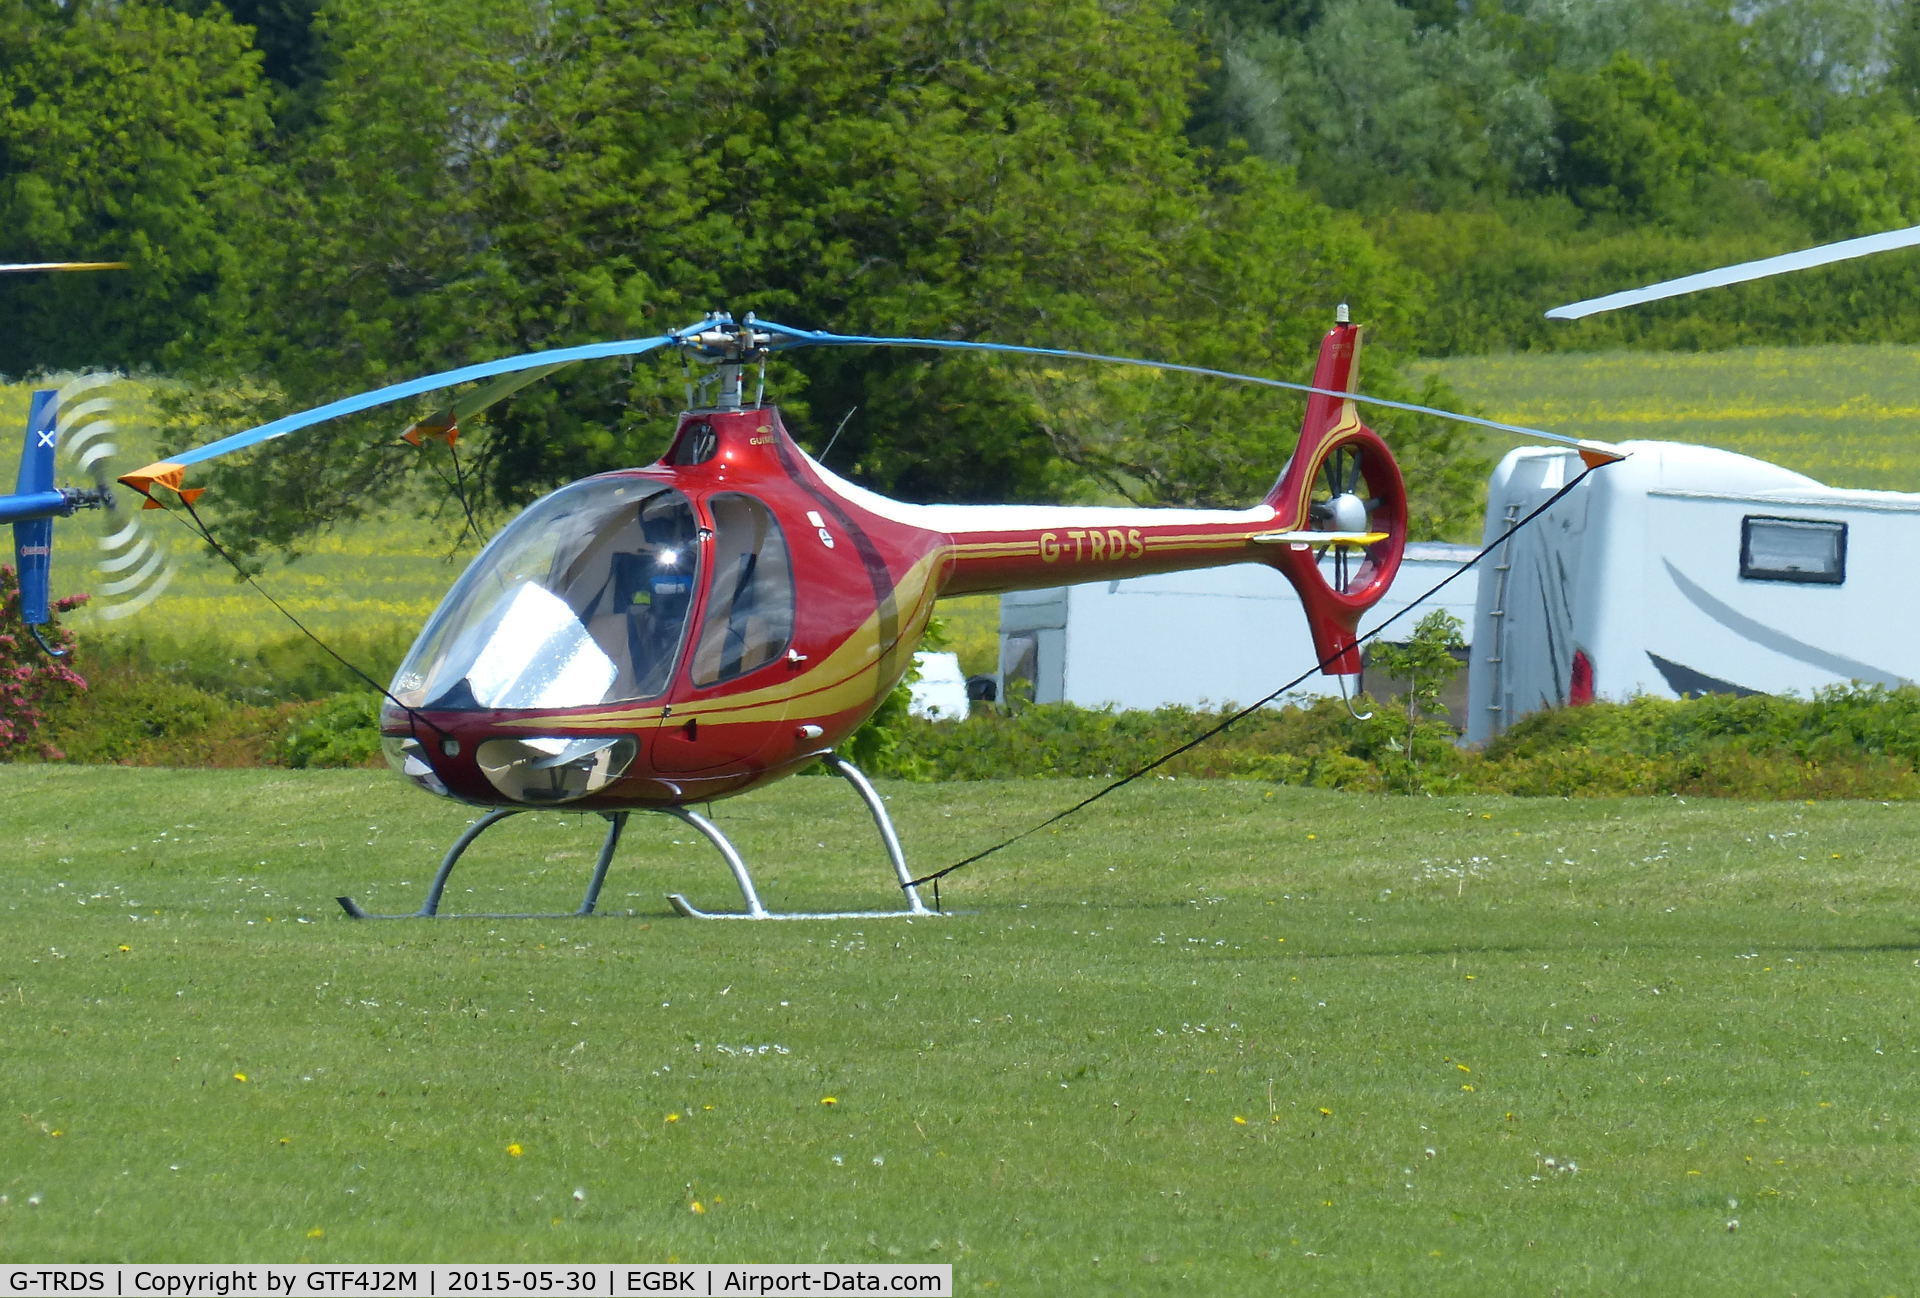 G-TRDS, 2013 Guimbal Cabri G2 C/N 1049, G-TRDS at Sywell 30.5.15